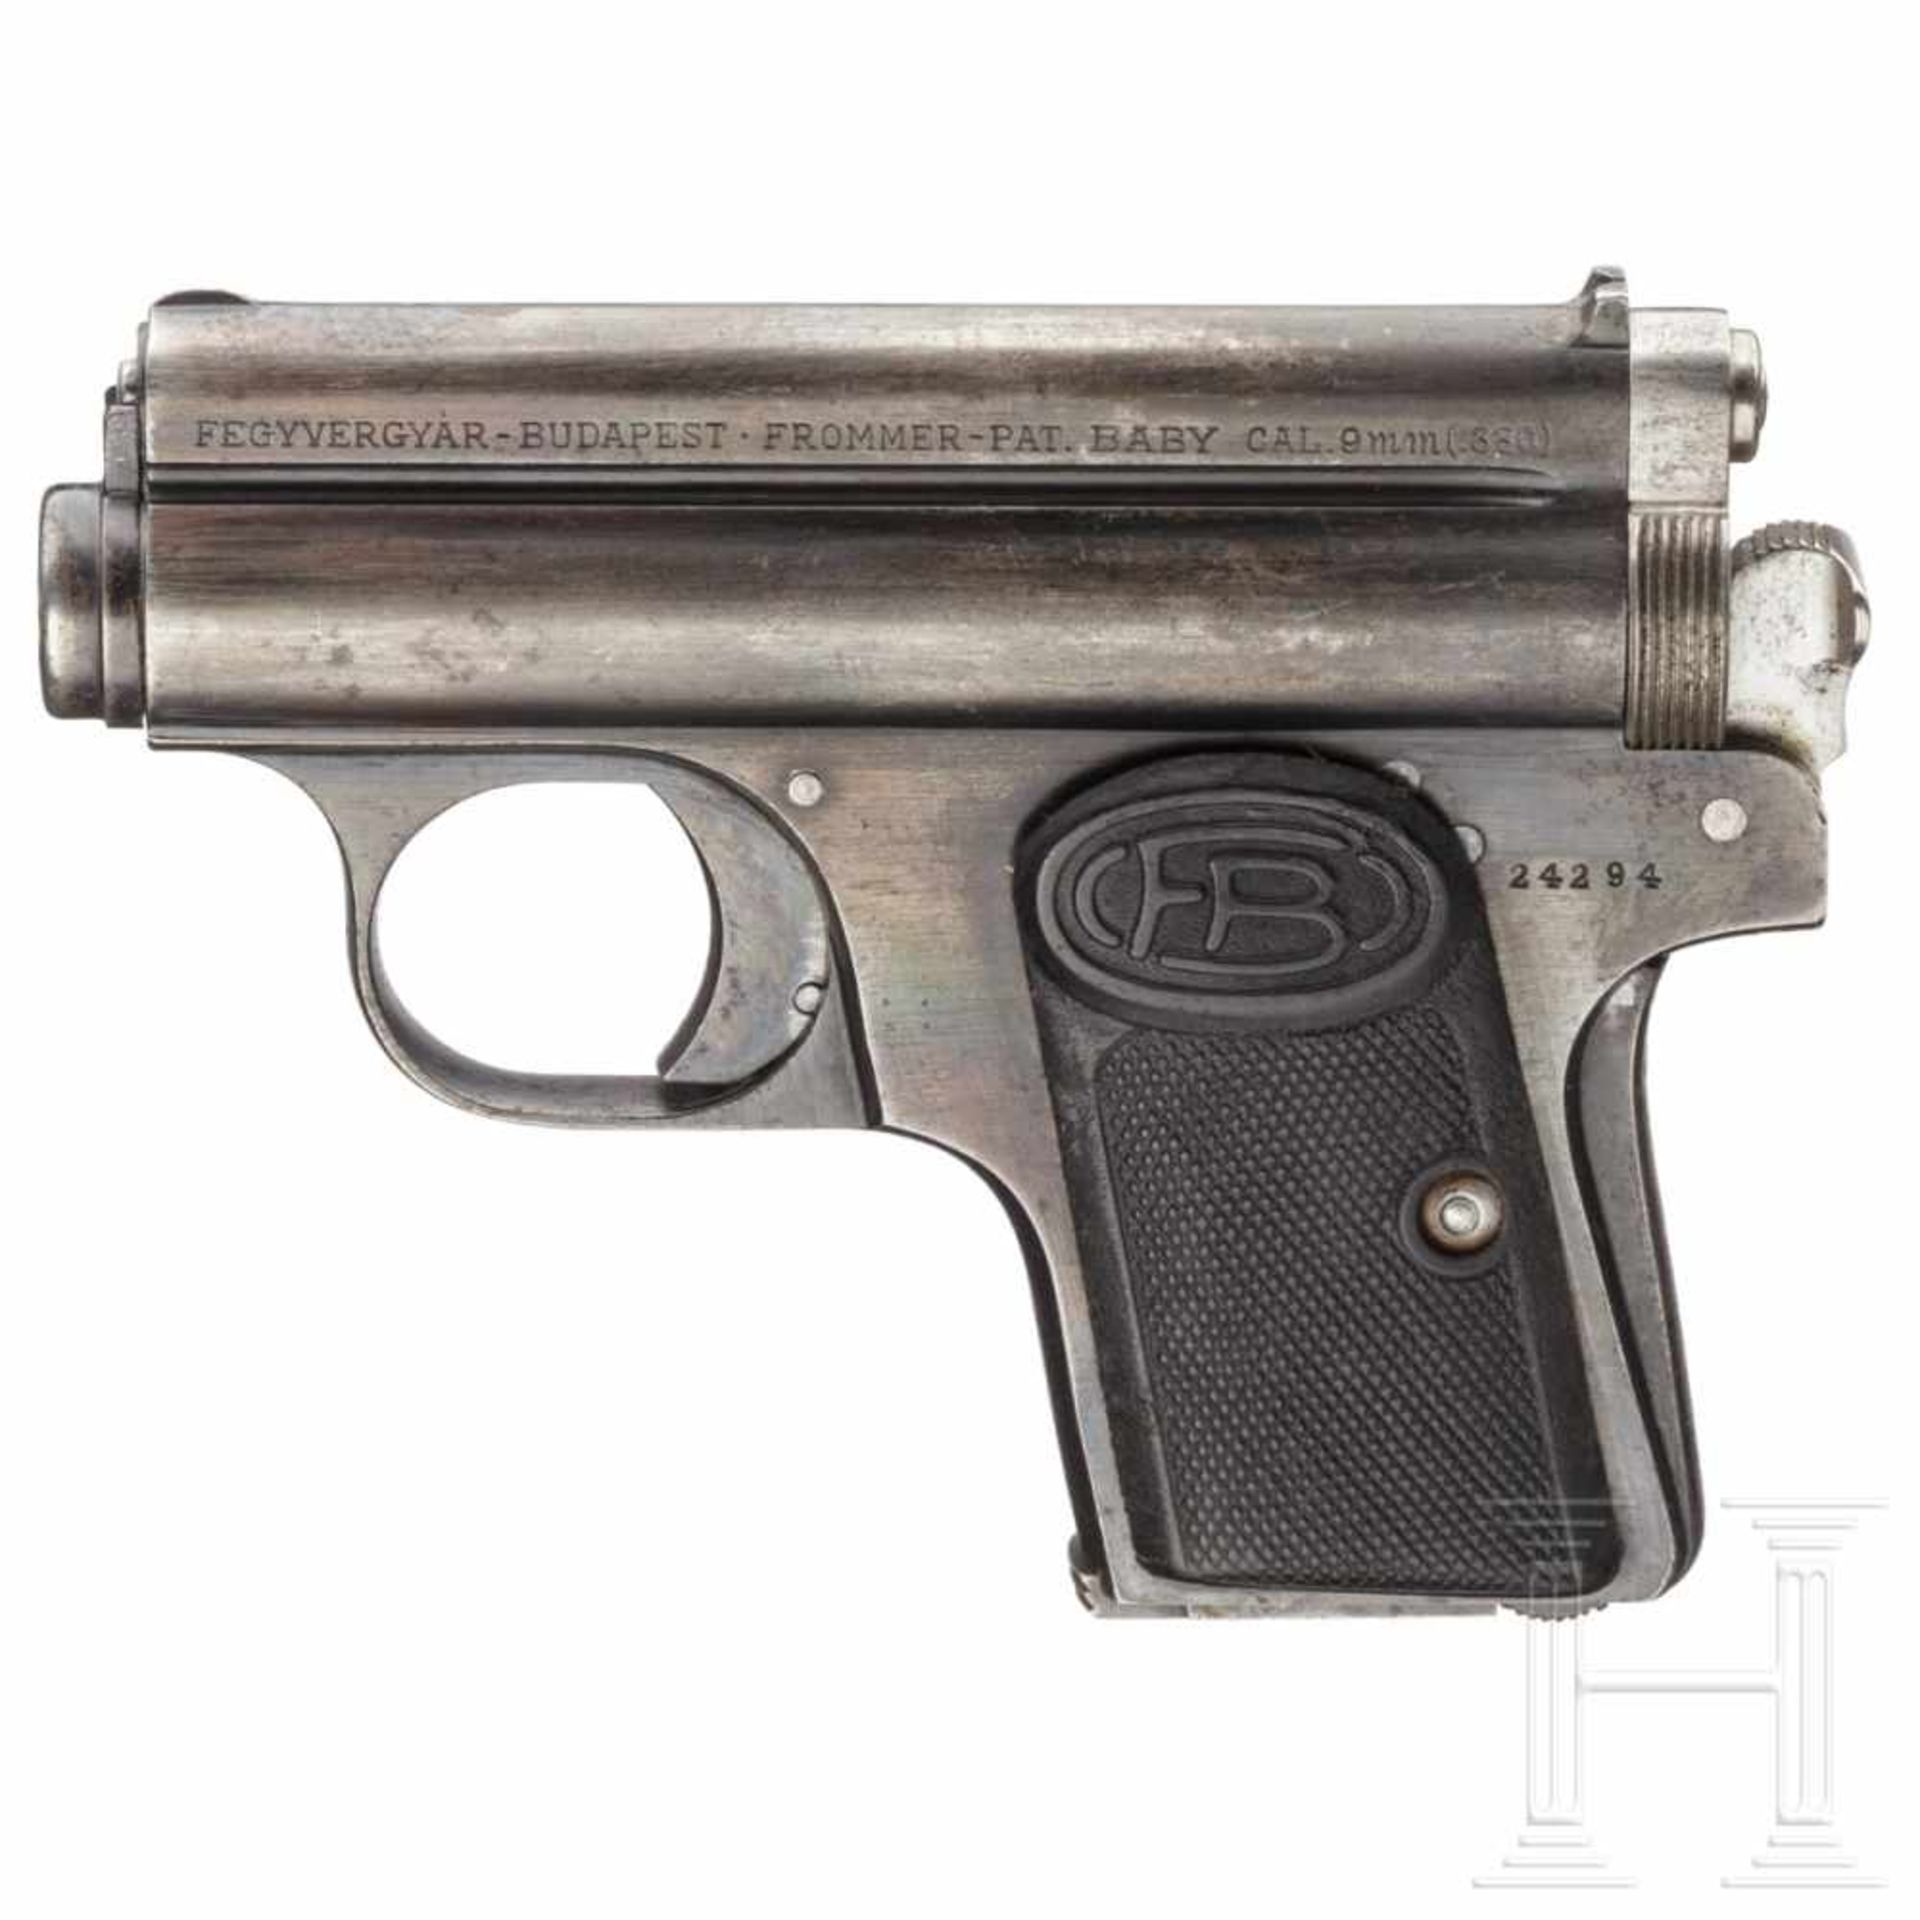 A Frommer M Baby cal. 9mm with holsterKal. 9 mm Brown. kurz, Nr. 24294, Blanker Lauf.